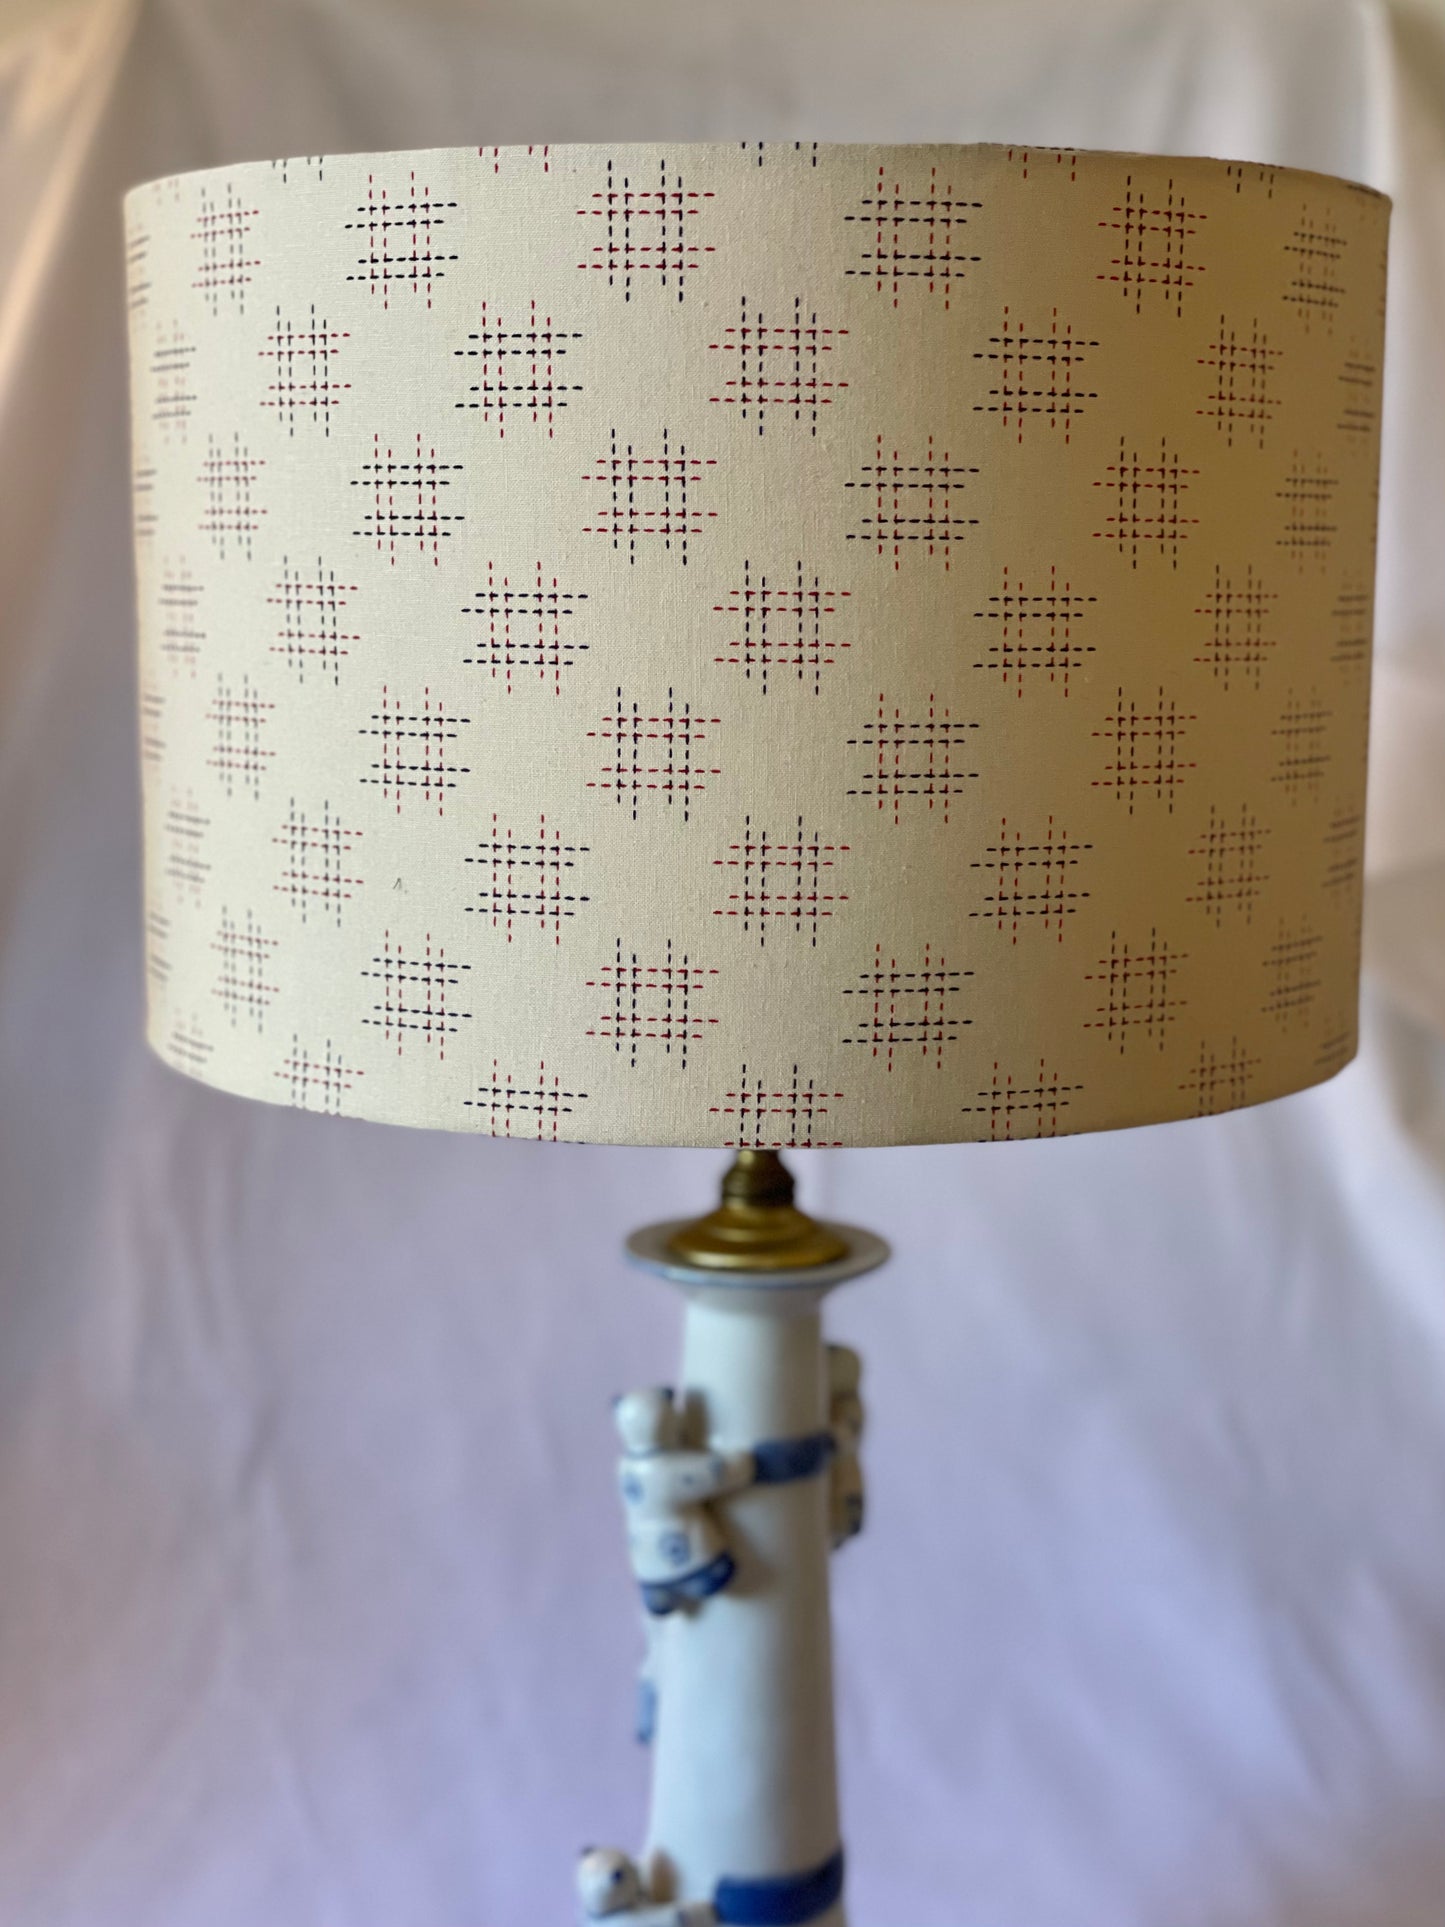 12 Inch Drum Shade. Traditional Japanese Design. Parchment with Maroon Hashtag Motif.